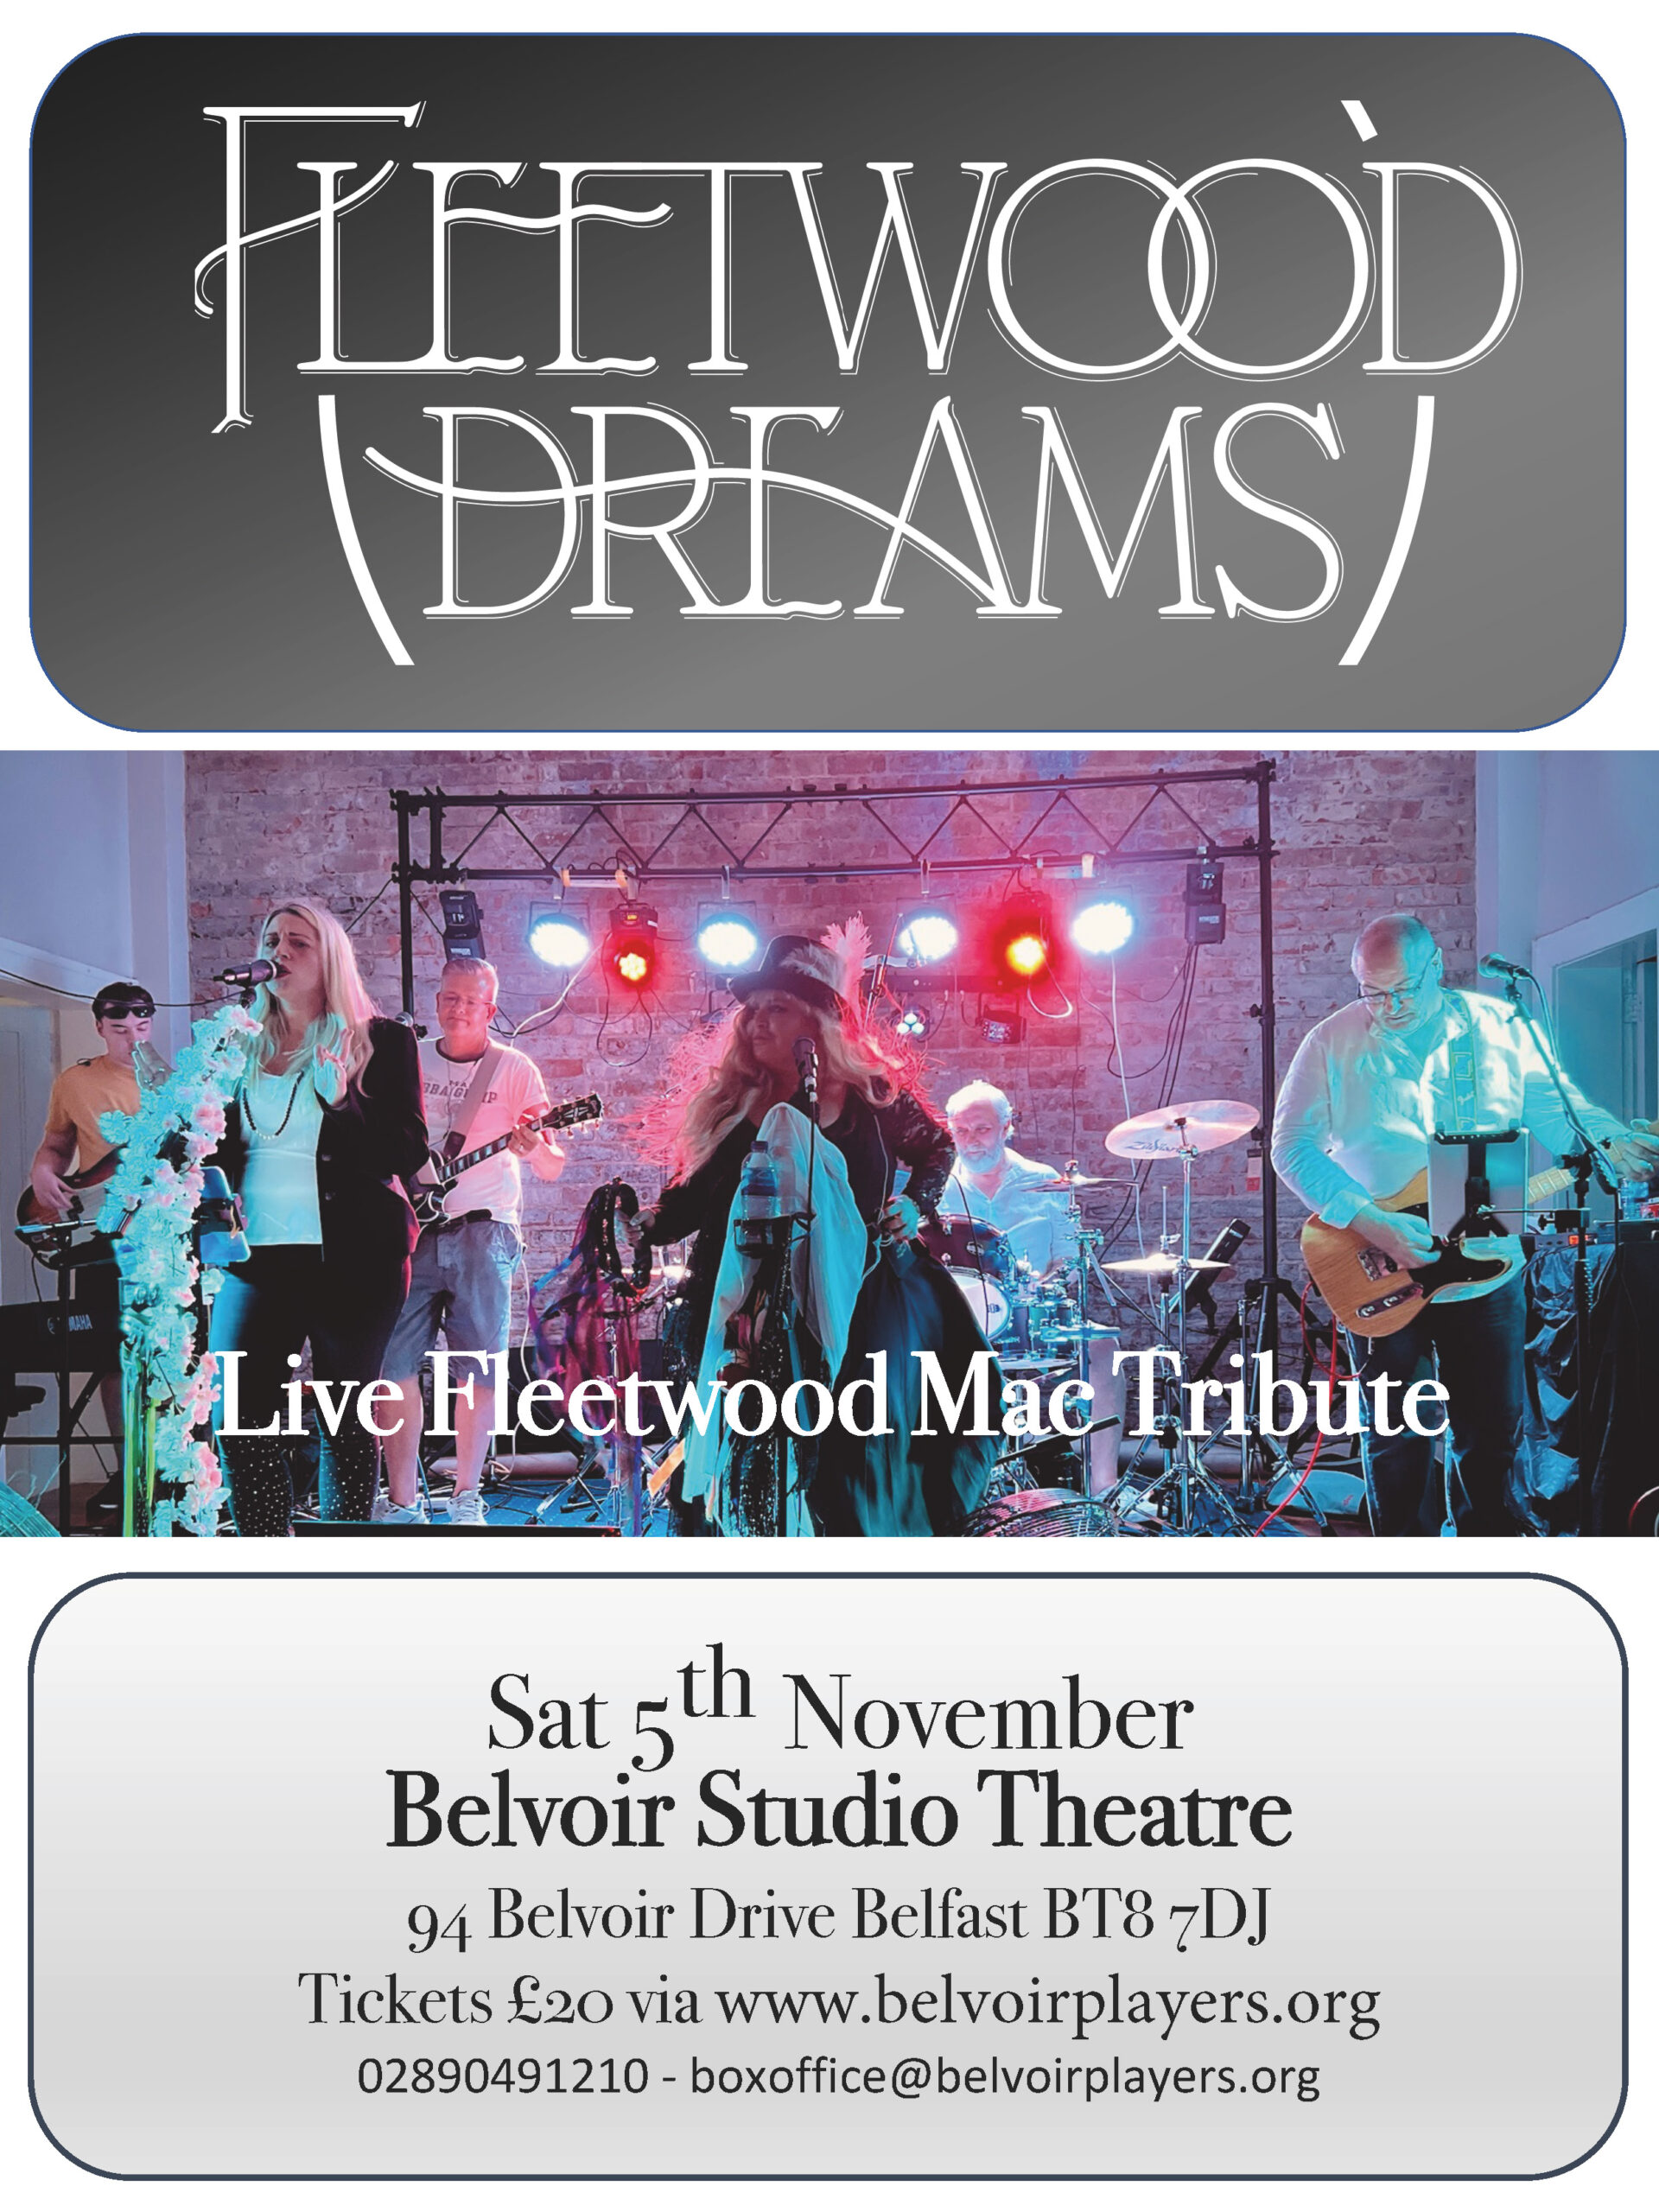 Fleetwood Dreams Live Fleetwood Mac Tribute playing in fron of coloured lights.